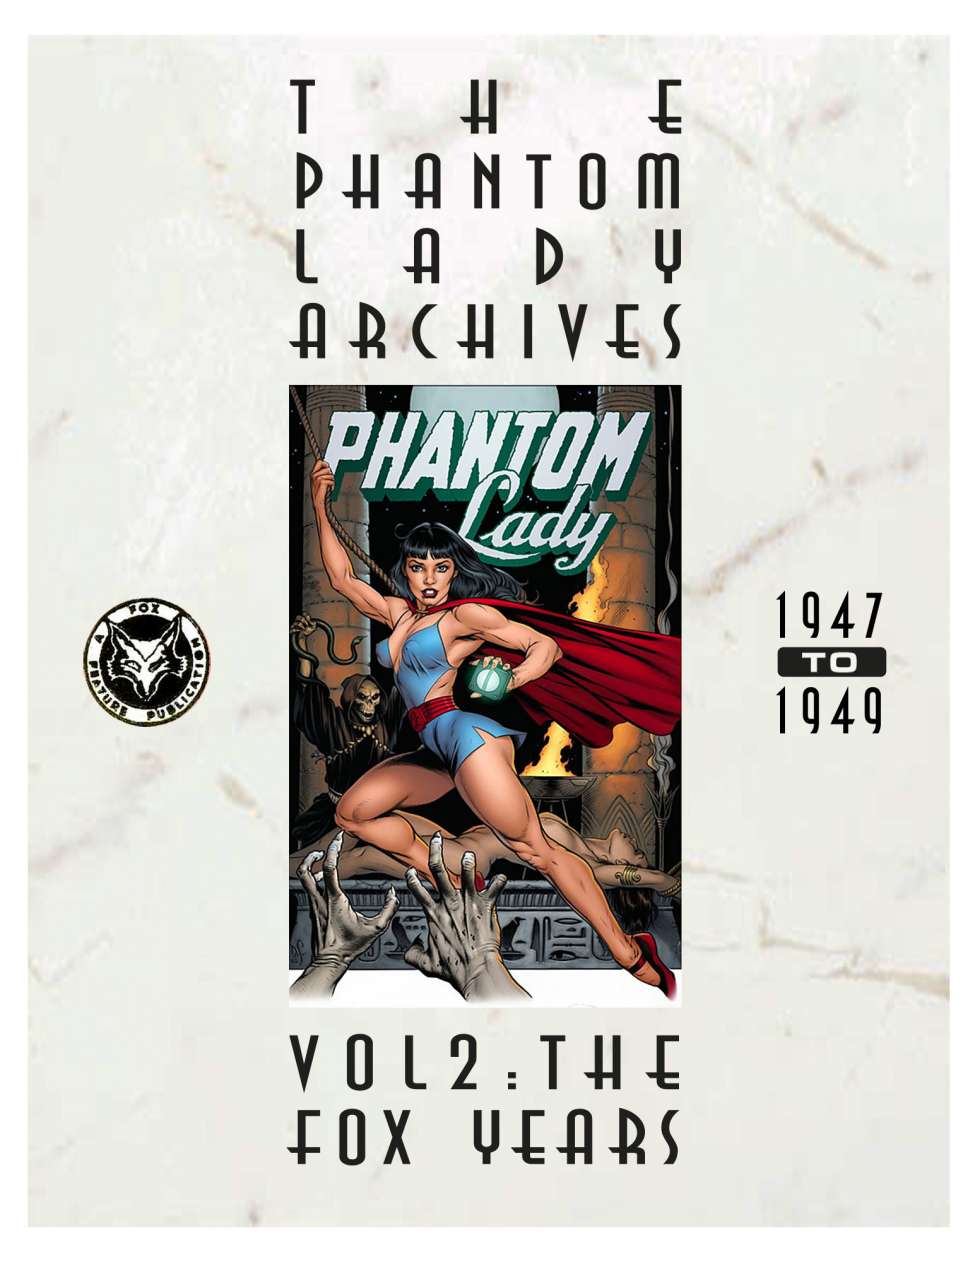 Book Cover For Phantom Lady Archives v2.4 - The Fox Years extras